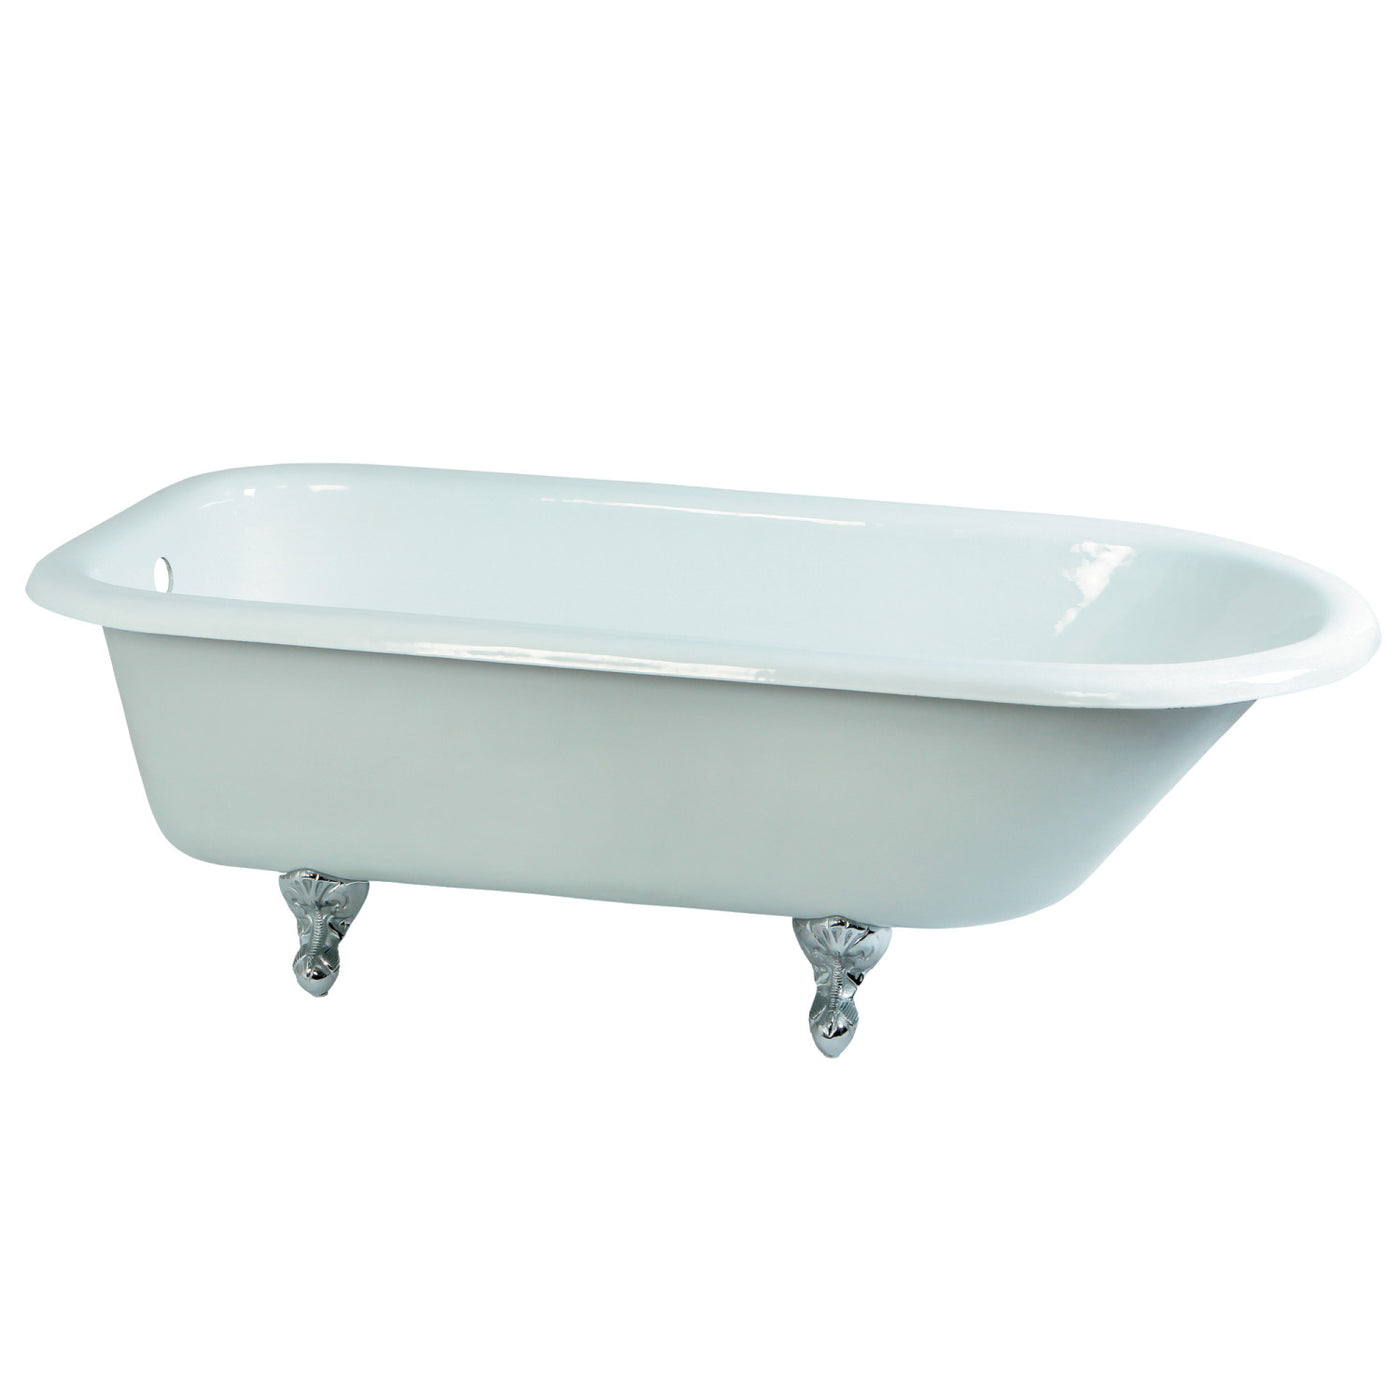 Elements of Design ECTND673123T1 67-Inch Cast Iron and Anti-Slide Roll Top Clawfoot Tub with Feet No Faucet Drillings, White/Polished Chrome